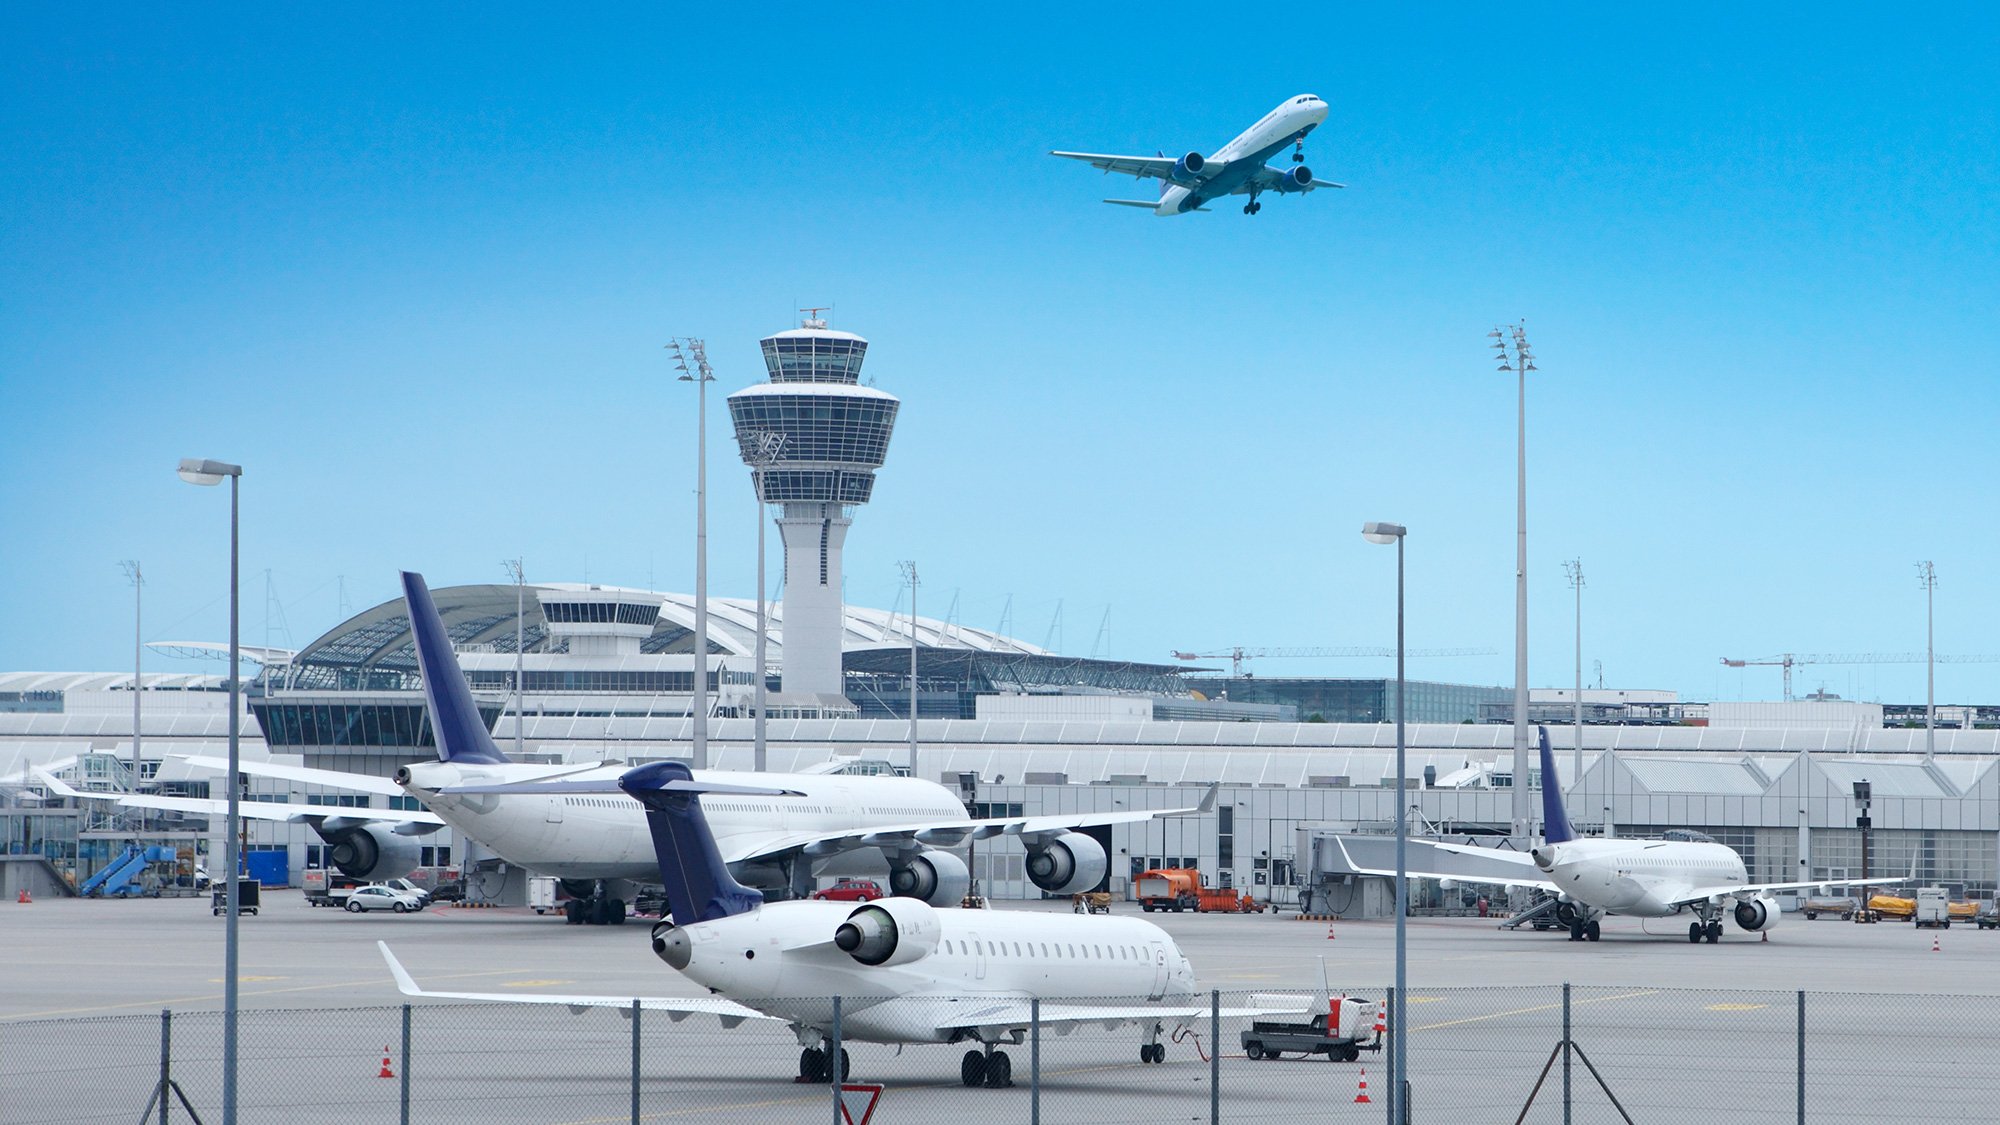 Airplanes landing and starting at the landing site of Munich Airport